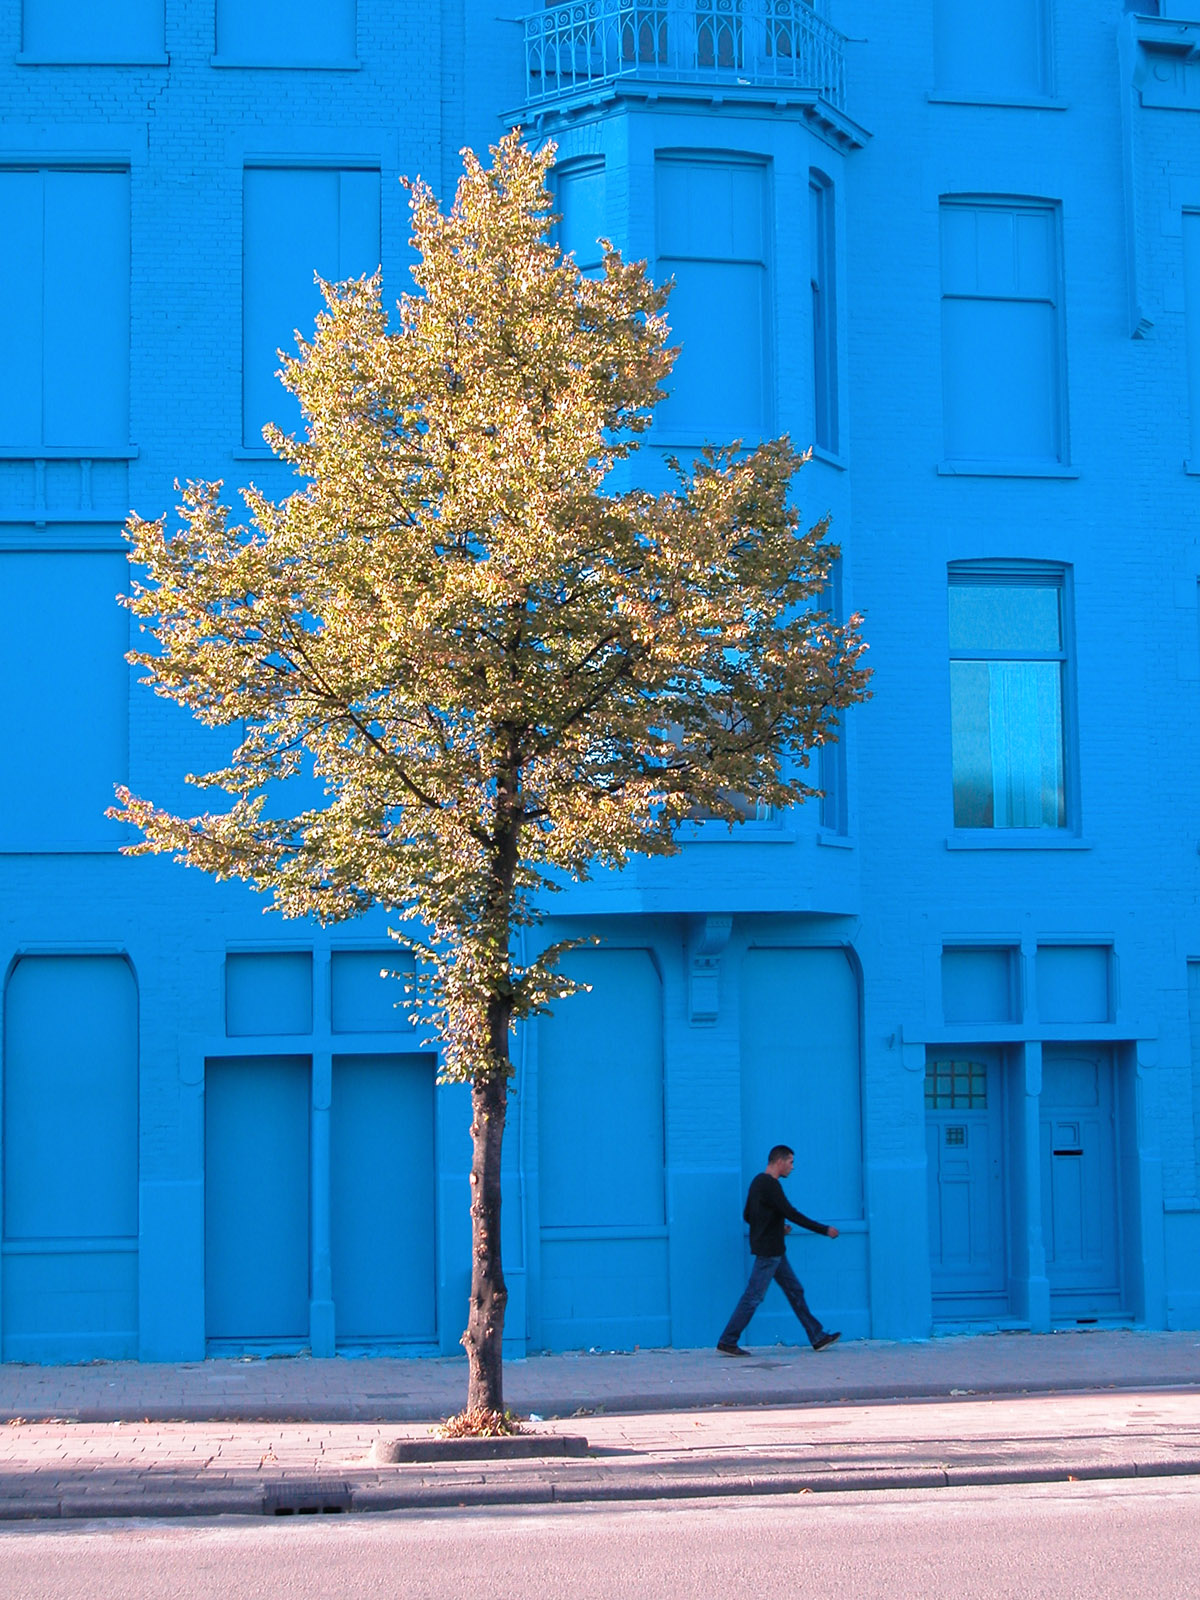 Blue building with tree